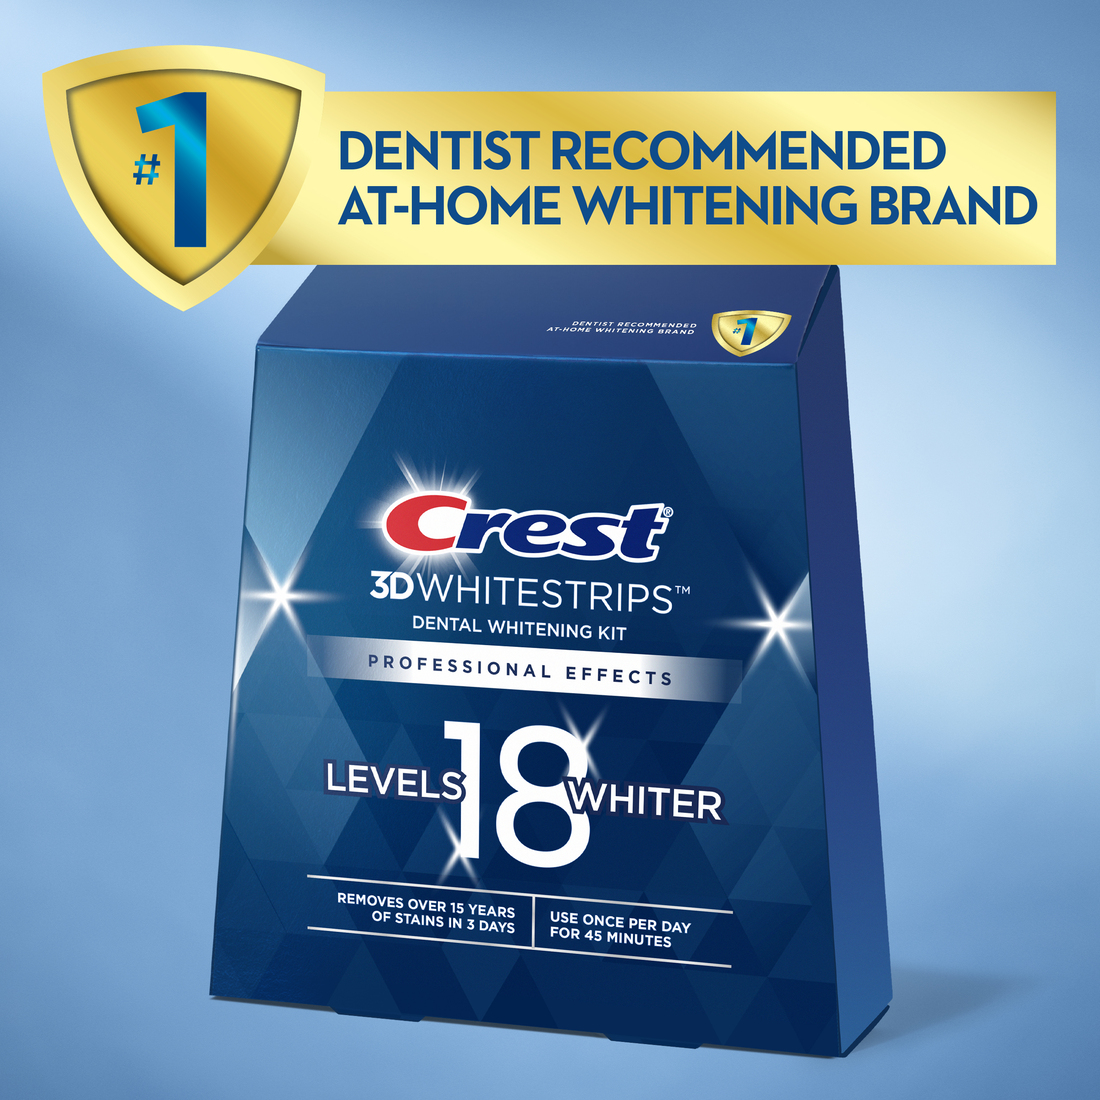  Crest 3D Whitestrips, Professional Effects, Teeth